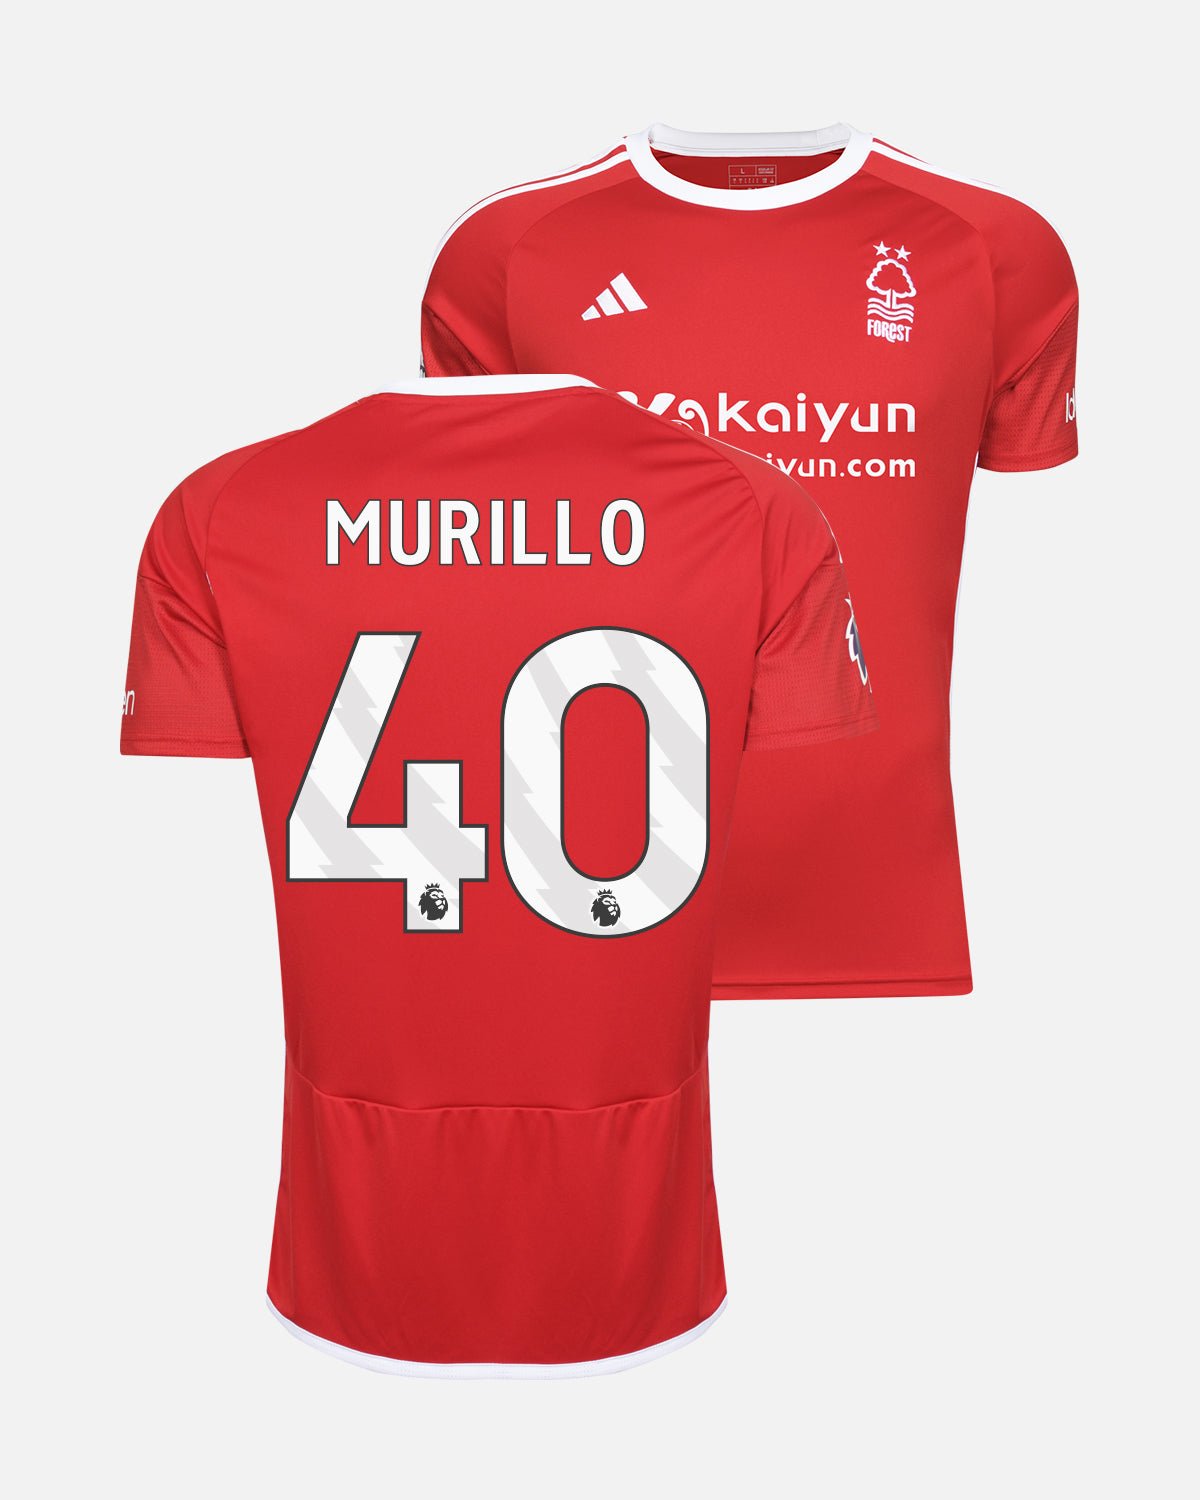 NFFC Home Shirt 23-24 - Murillo 40 - Nottingham Forest FC